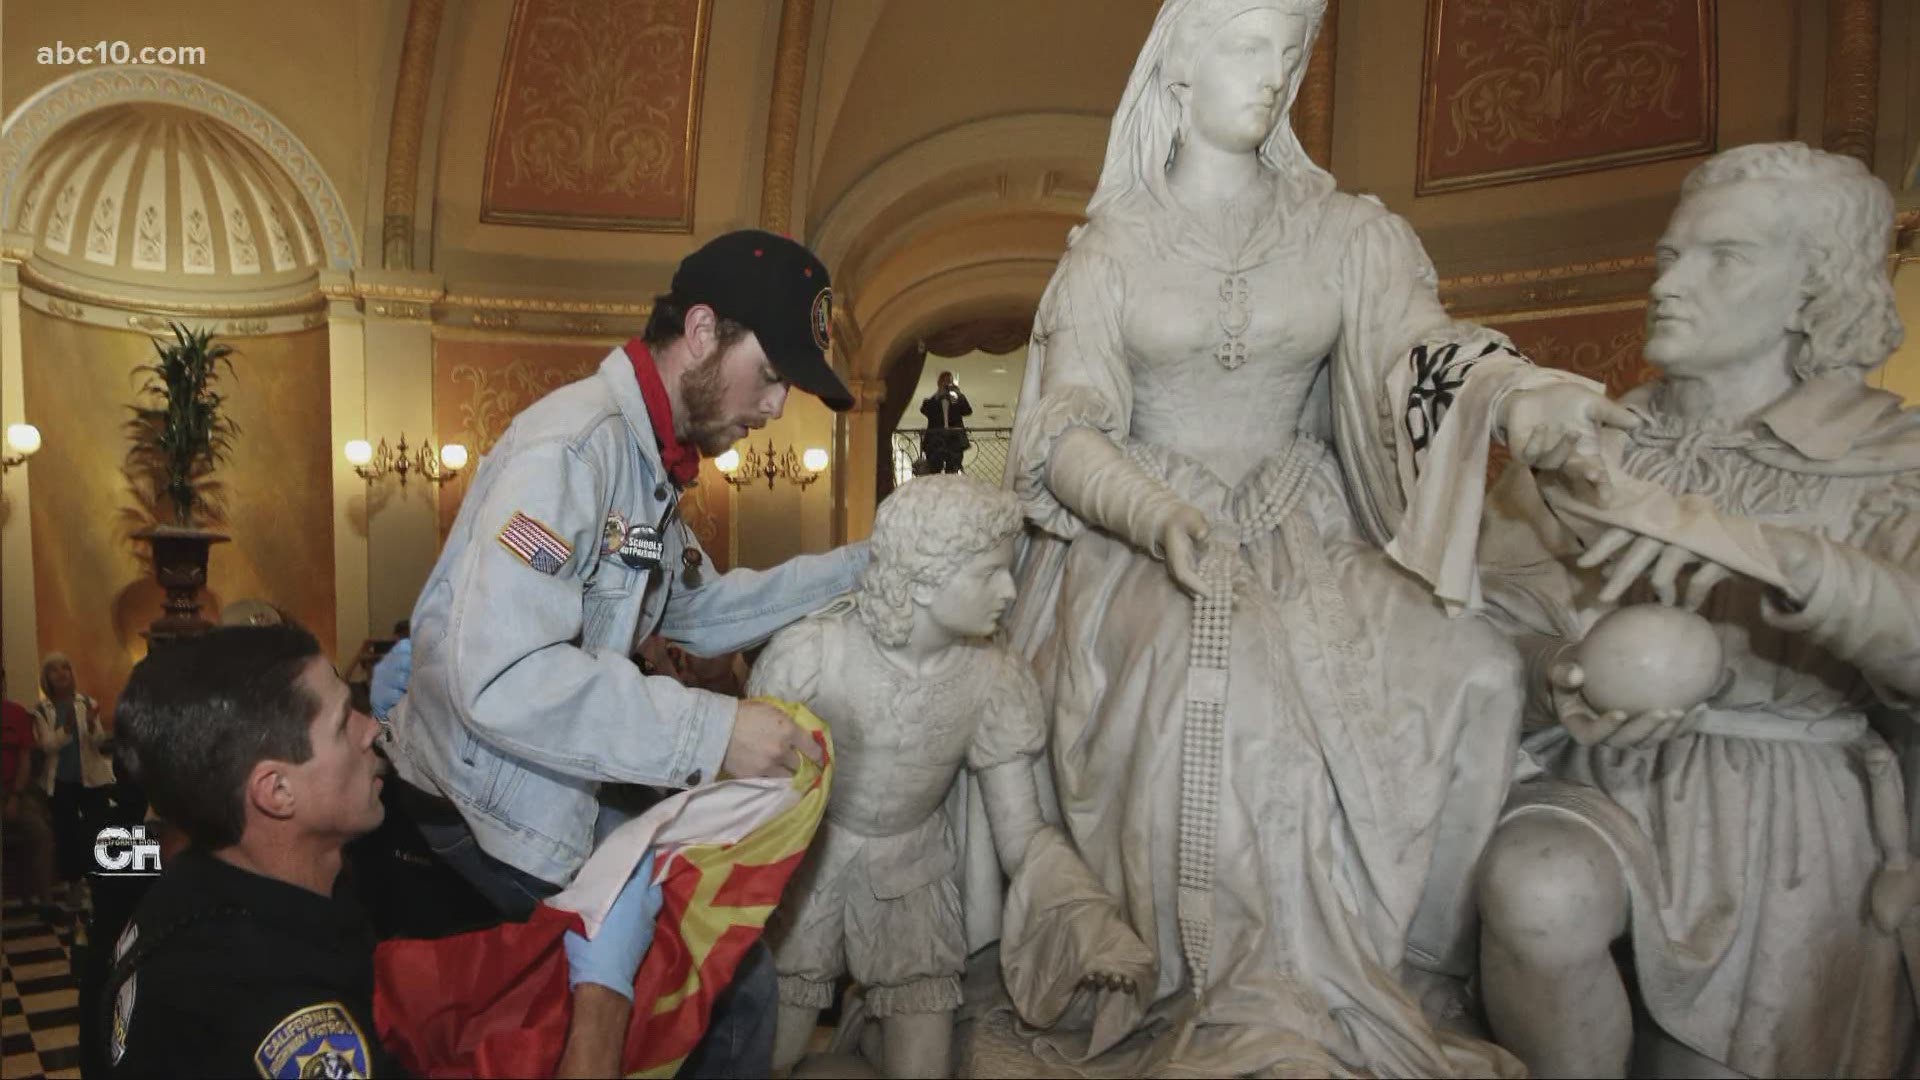 A statue of Christopher Columbus and Queen Isabella is to be removed from California Capitol because of the deadly impact Columbus had on indigenous populations.